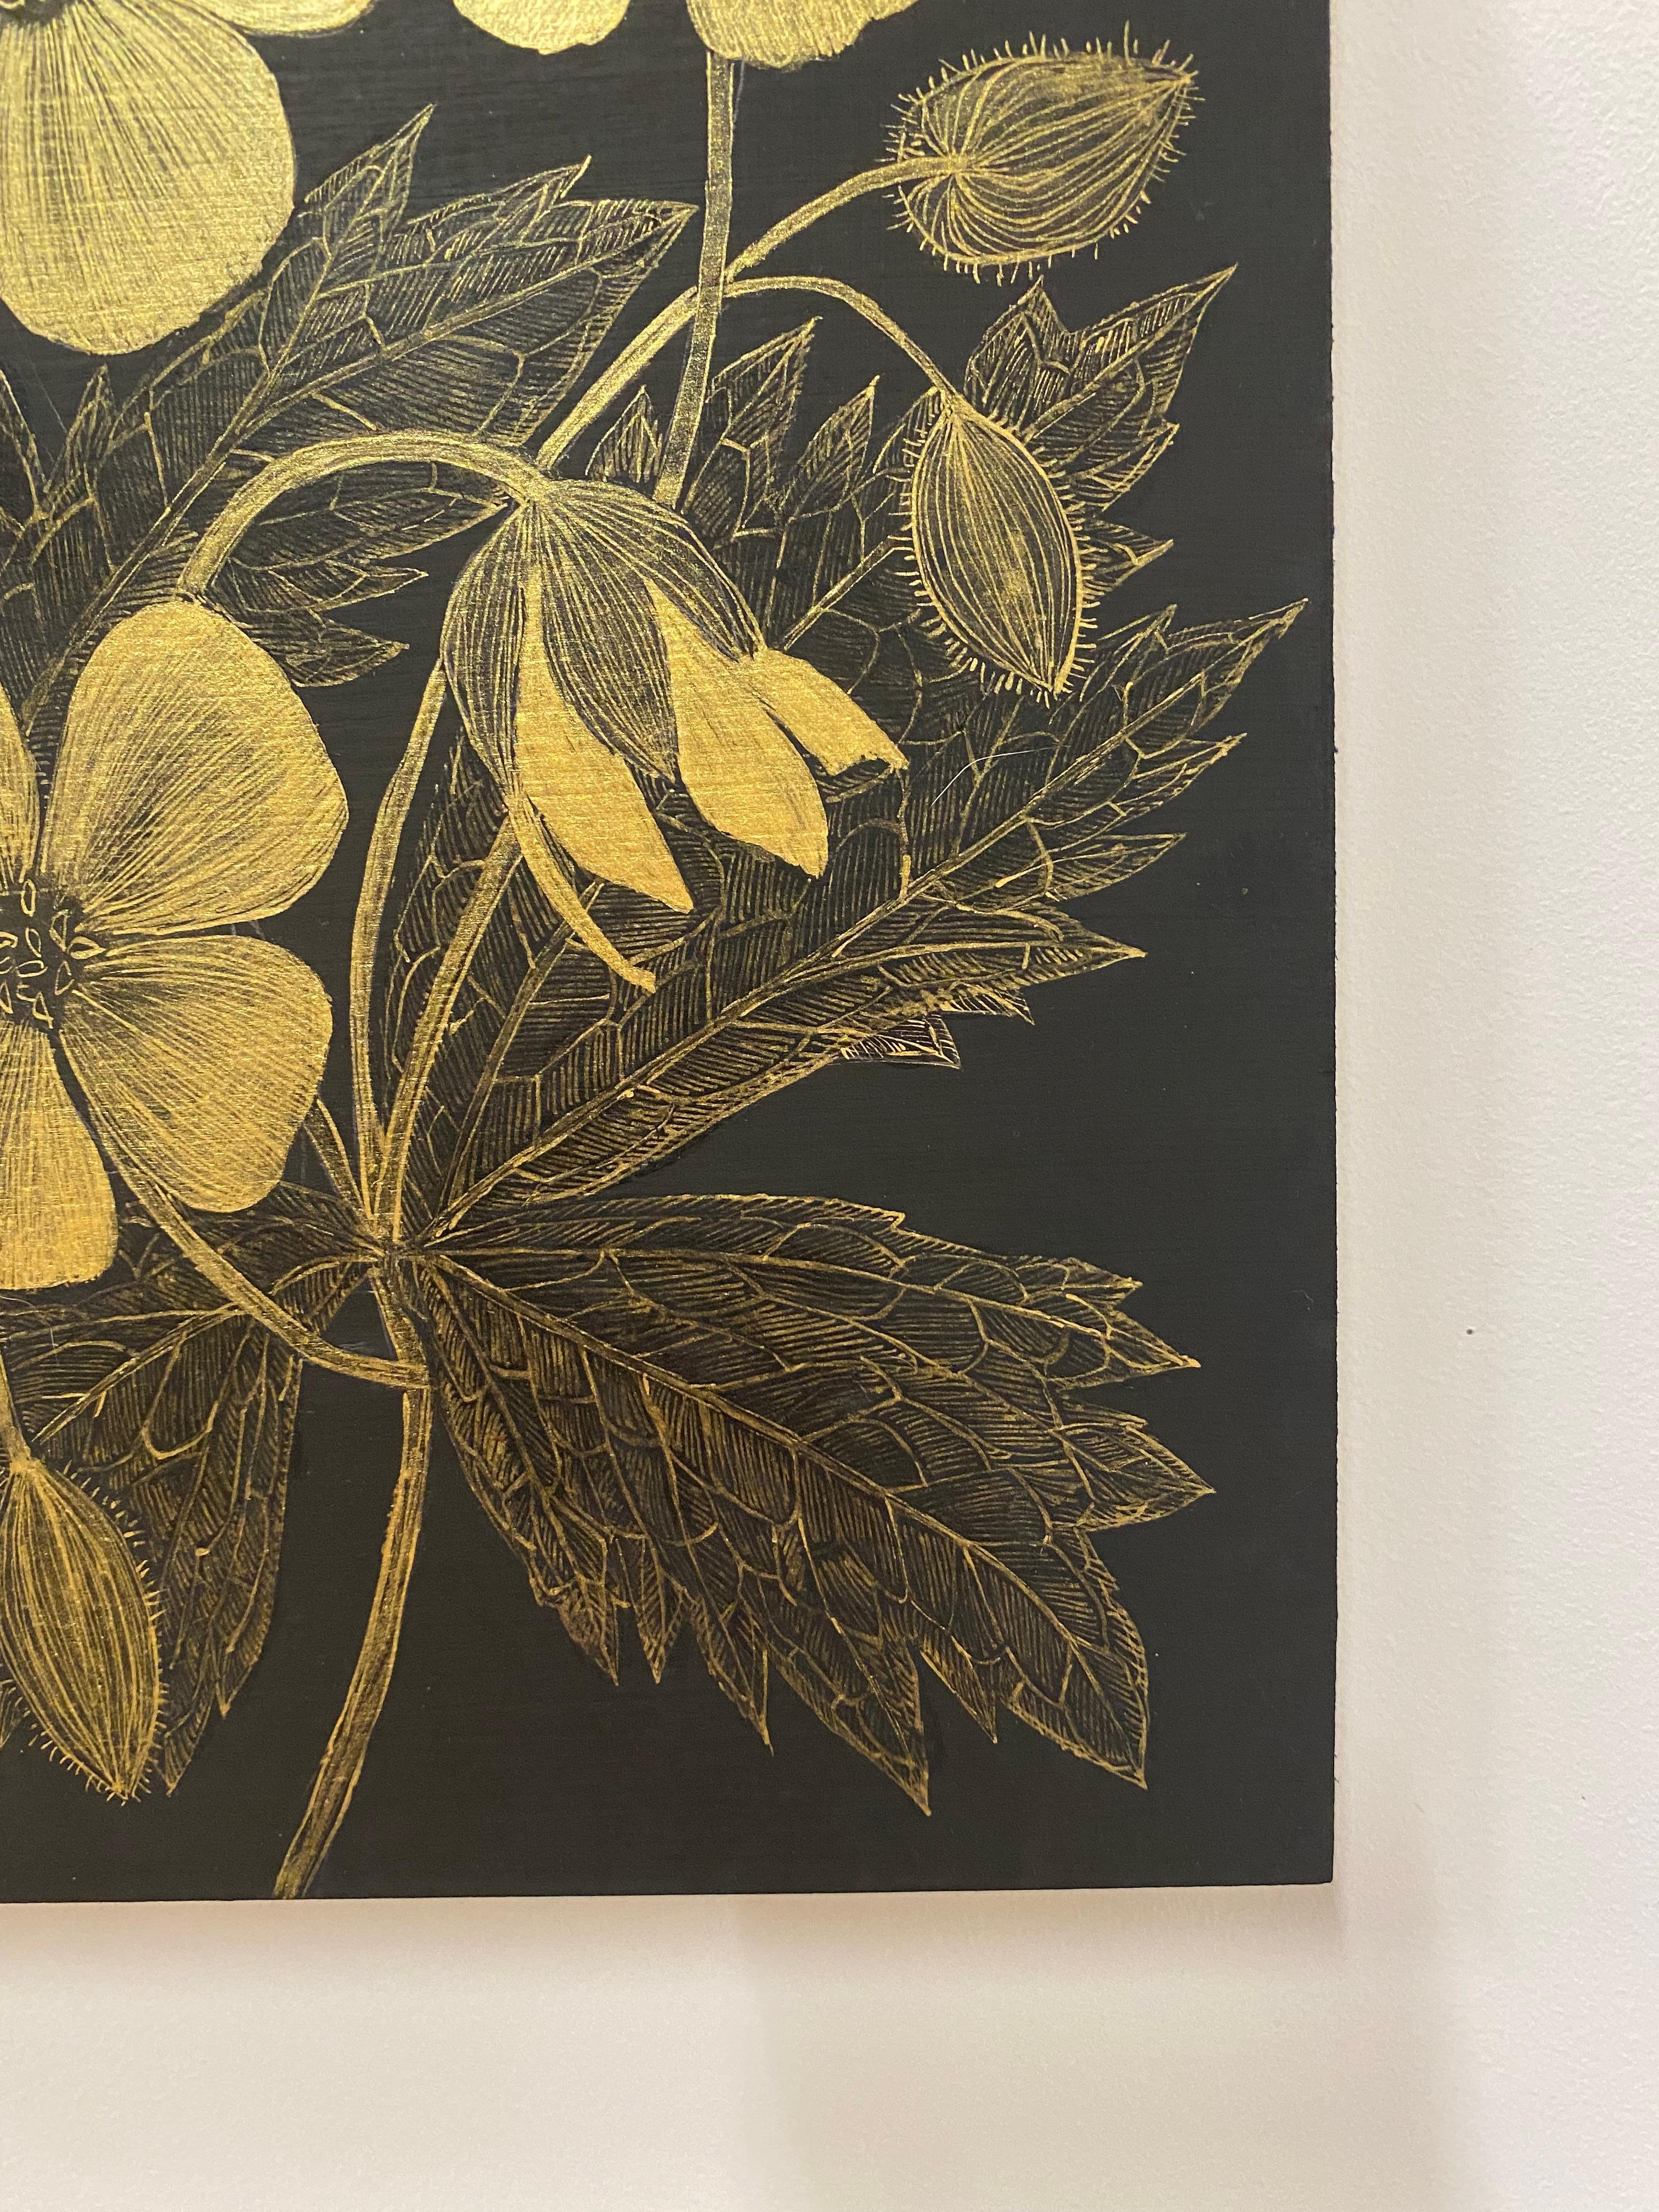 Wild Geranium Two, Botanical Painting Black Panel, Gold Flowers, Leaves, Stem For Sale 5